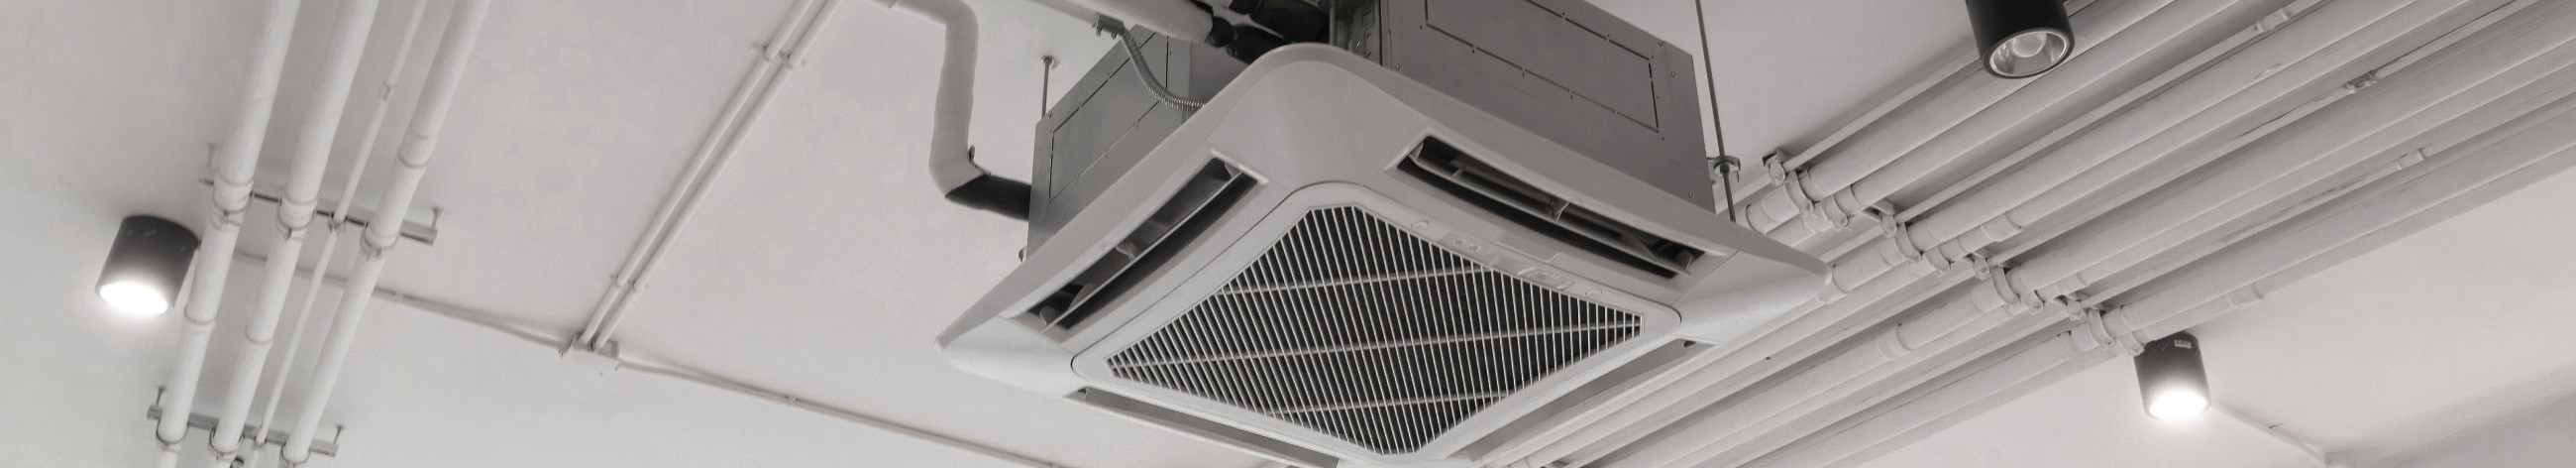 design and maintenance of ventilation systems, ventilation equipment sales, condomsons and air heat pumps, installation of ventilation equipment, air distribution systems, air conditioners, sale and installation of ventilation equipment, design and maintenance, design and maintenance of air conditioners, Installation